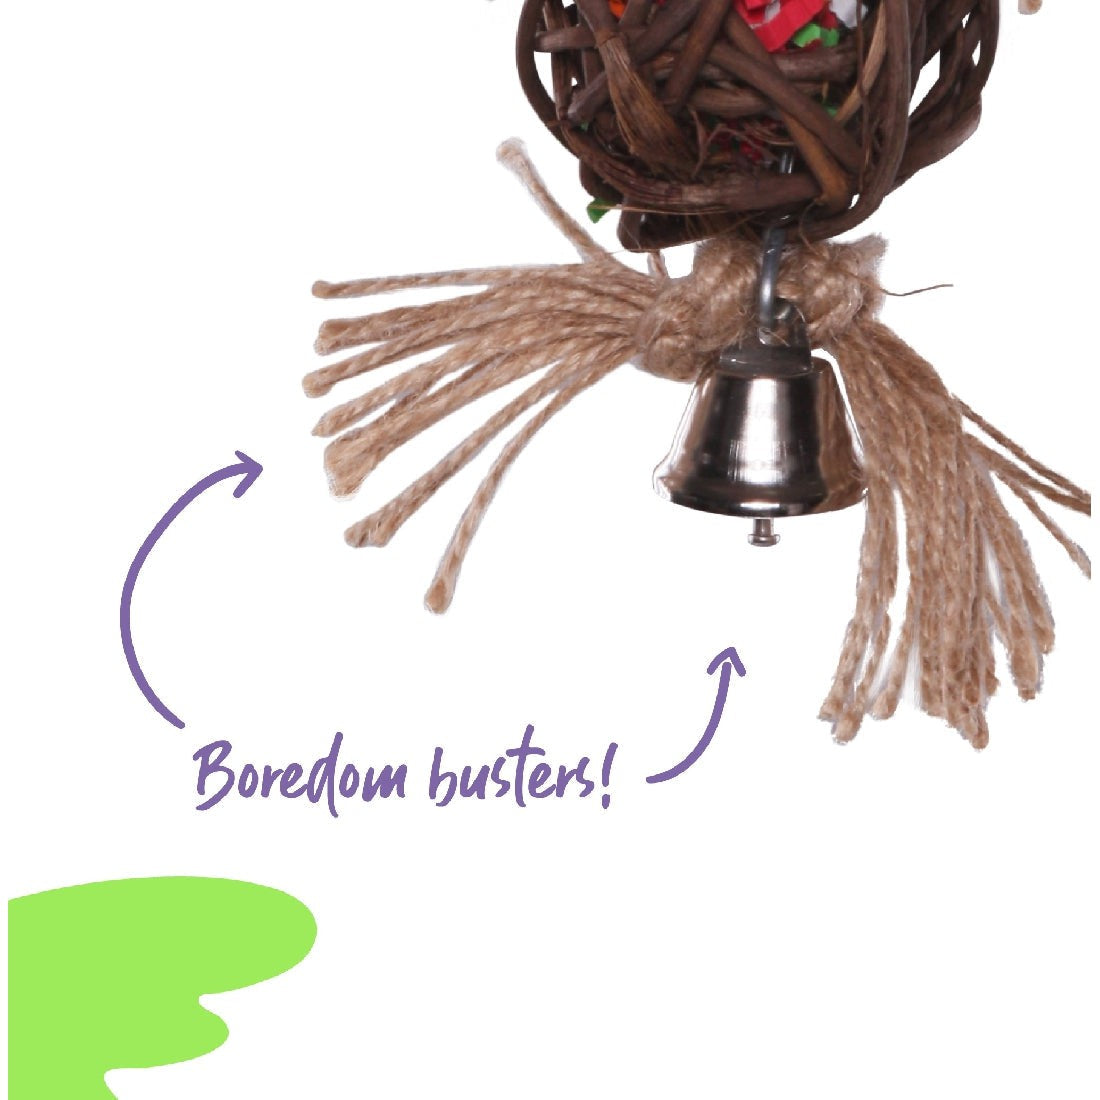 Brown wicker bird toy with strings and bell, labeled "Boredom busters!"